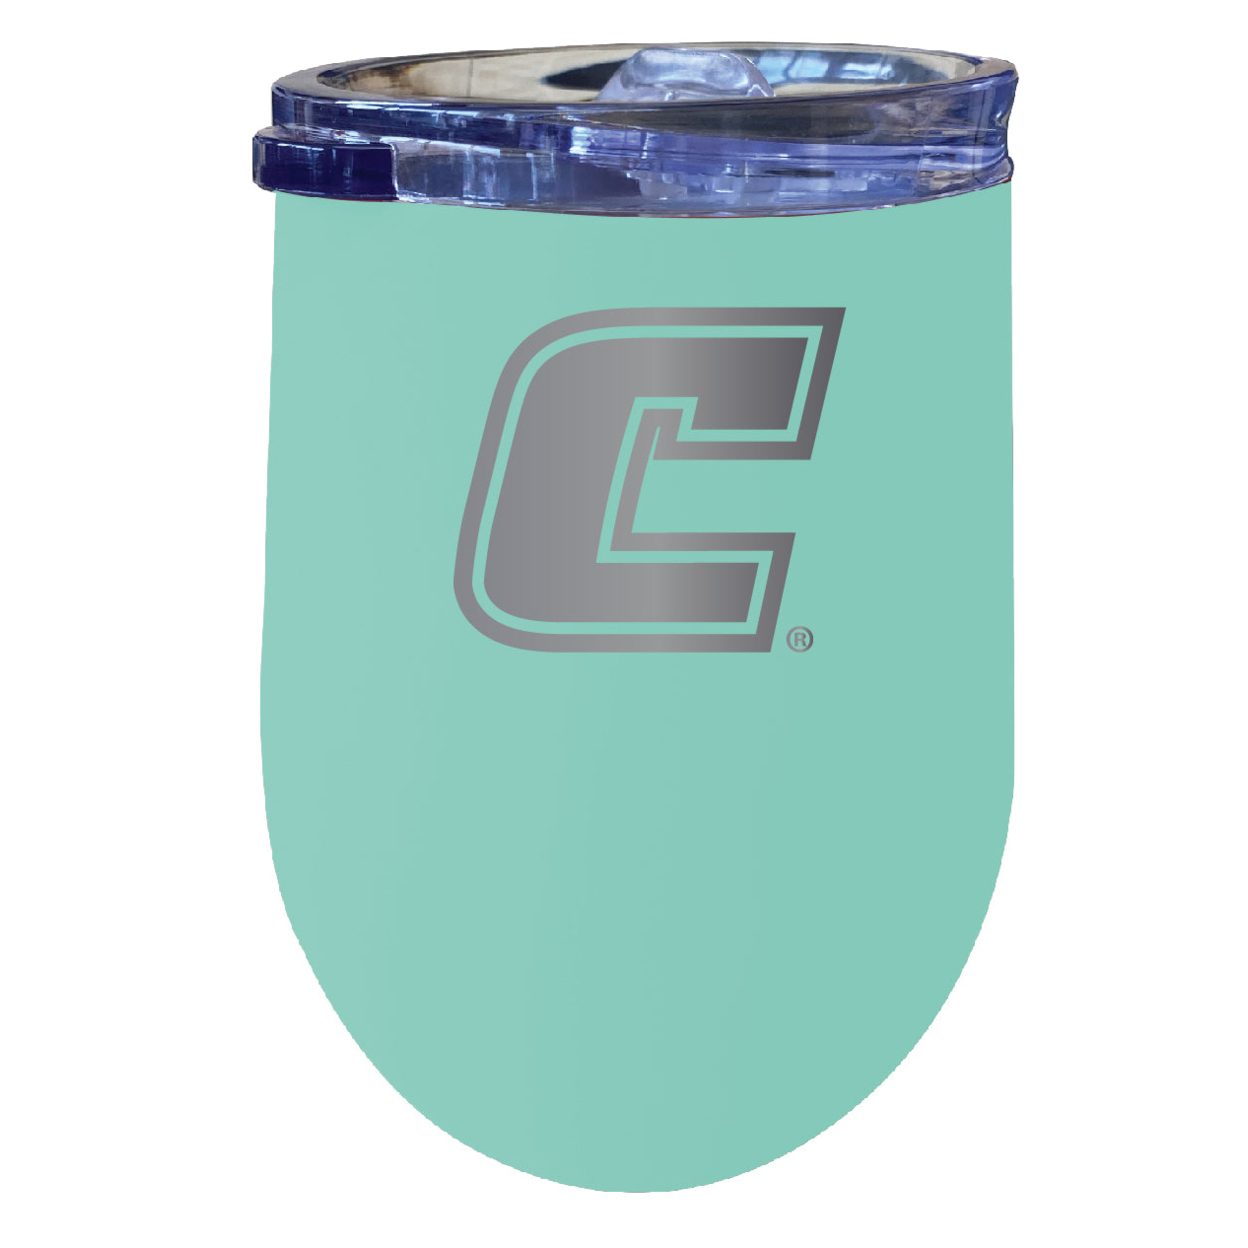 University Of Tennessee At Chattanooga 12 Oz Etched Insulated Wine Stainless Steel Tumbler - Choose Your Color - Seafoam